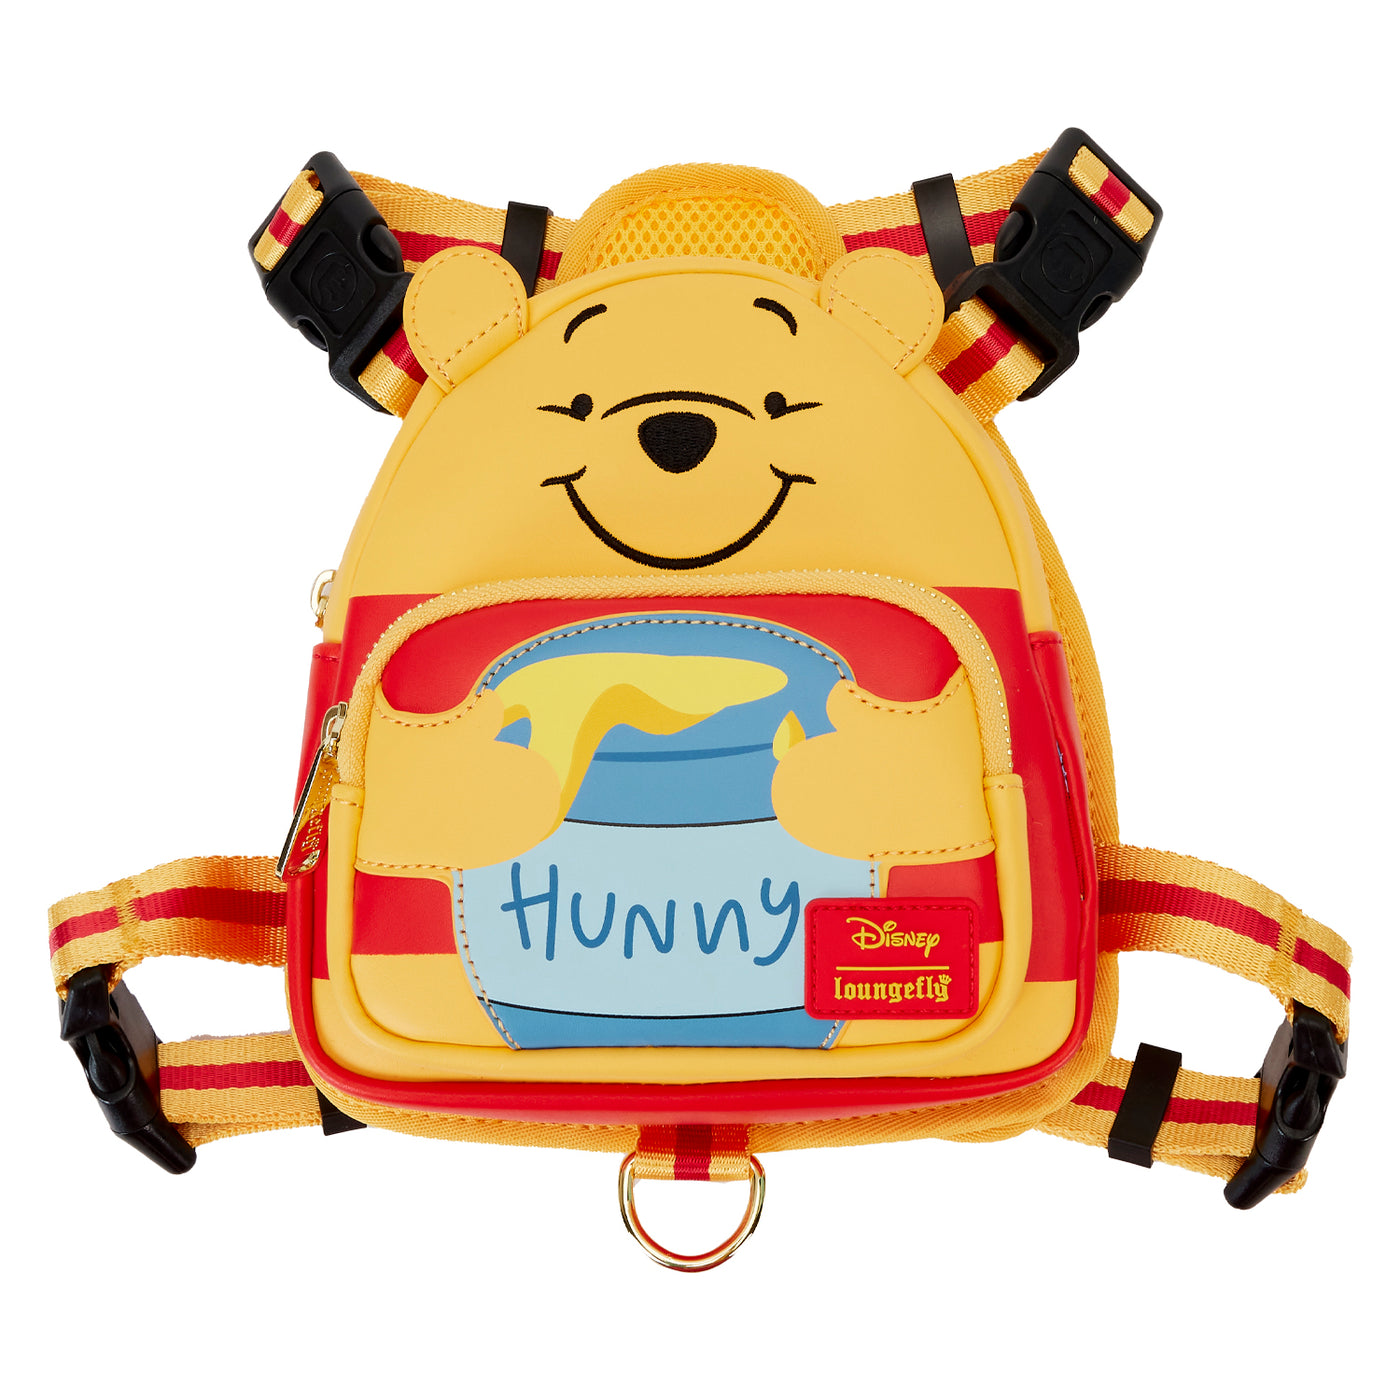 Loungefly Disney Winnie the Pooh Cosplay Backpack Dog Harness